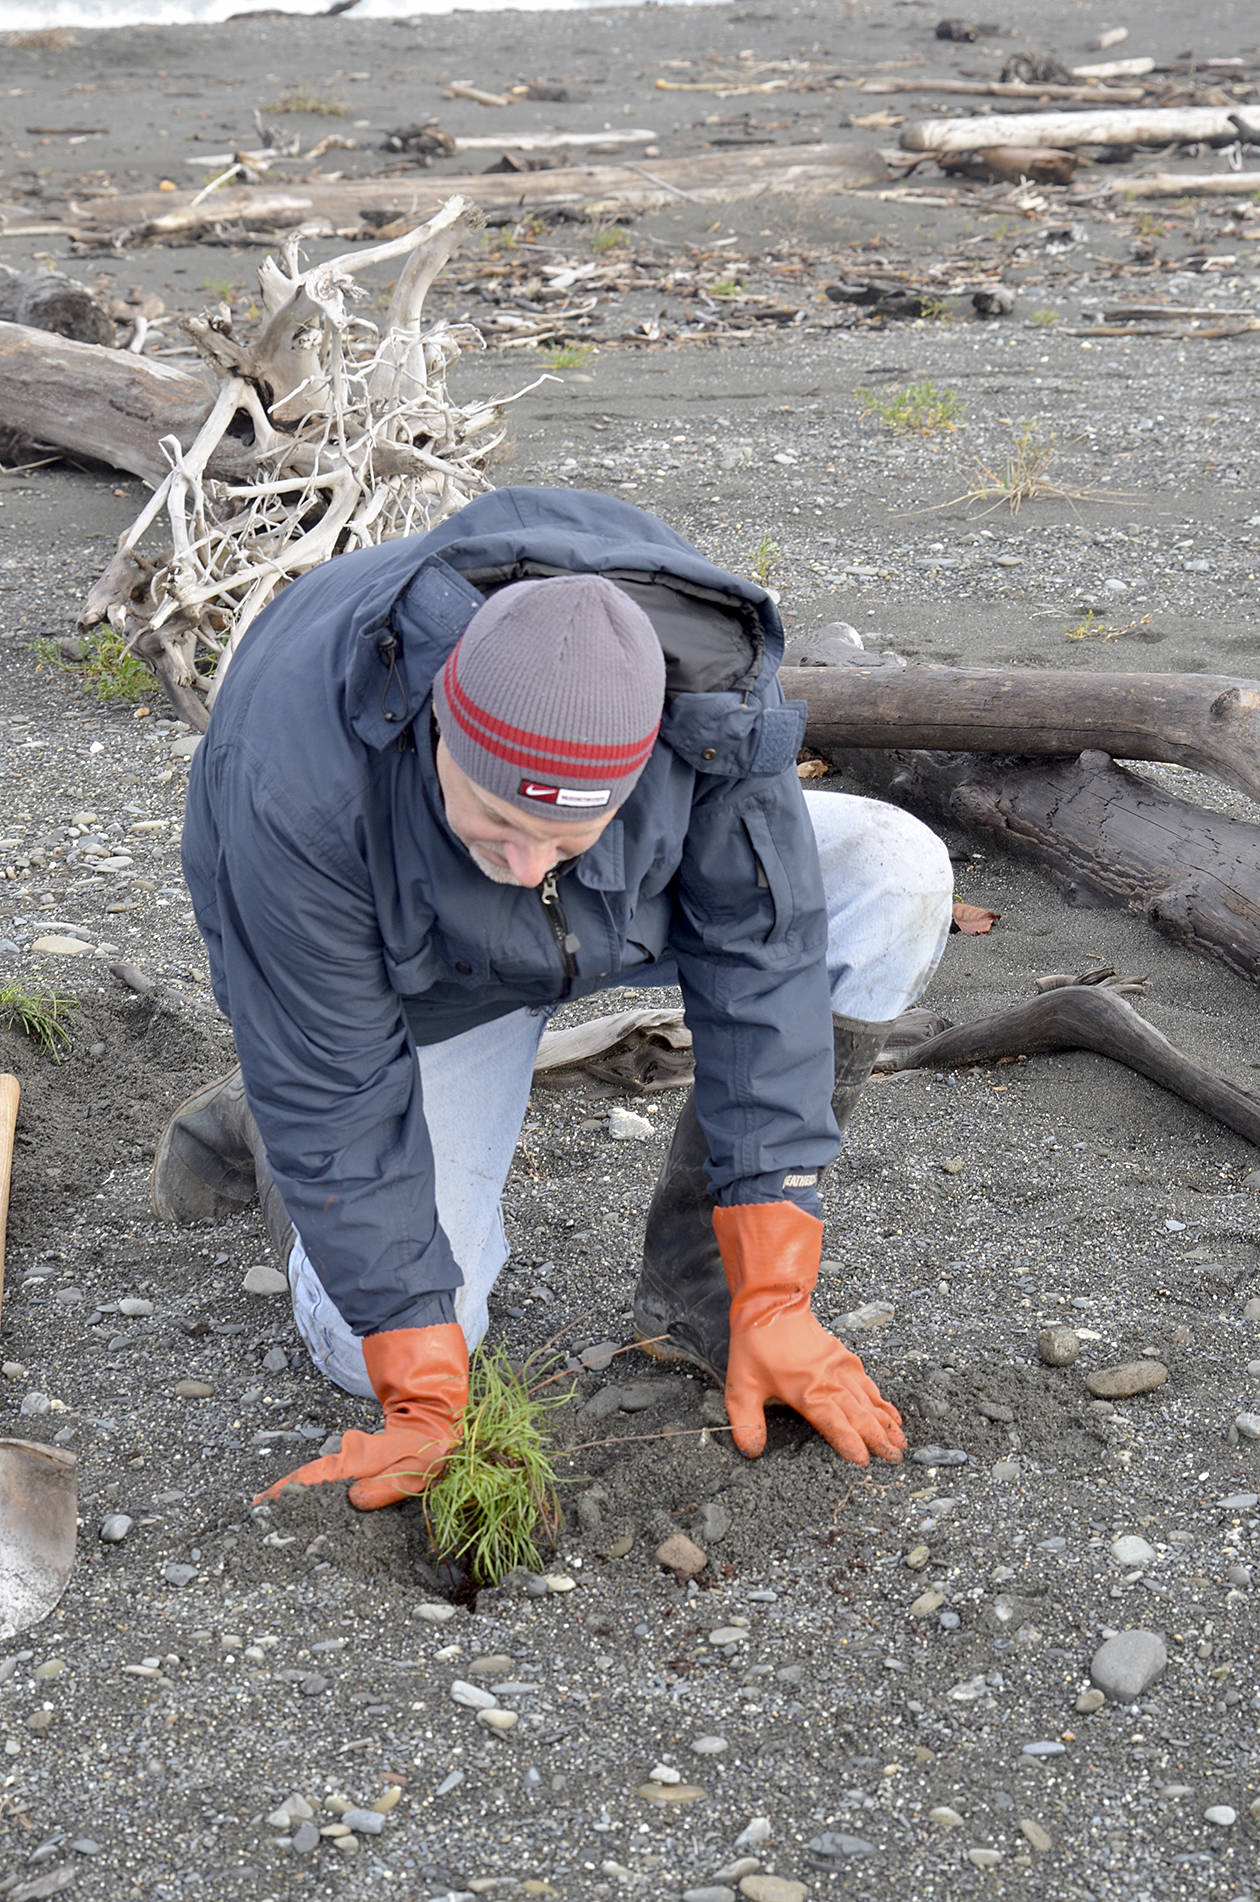 Volunteers set out native plants on new beach